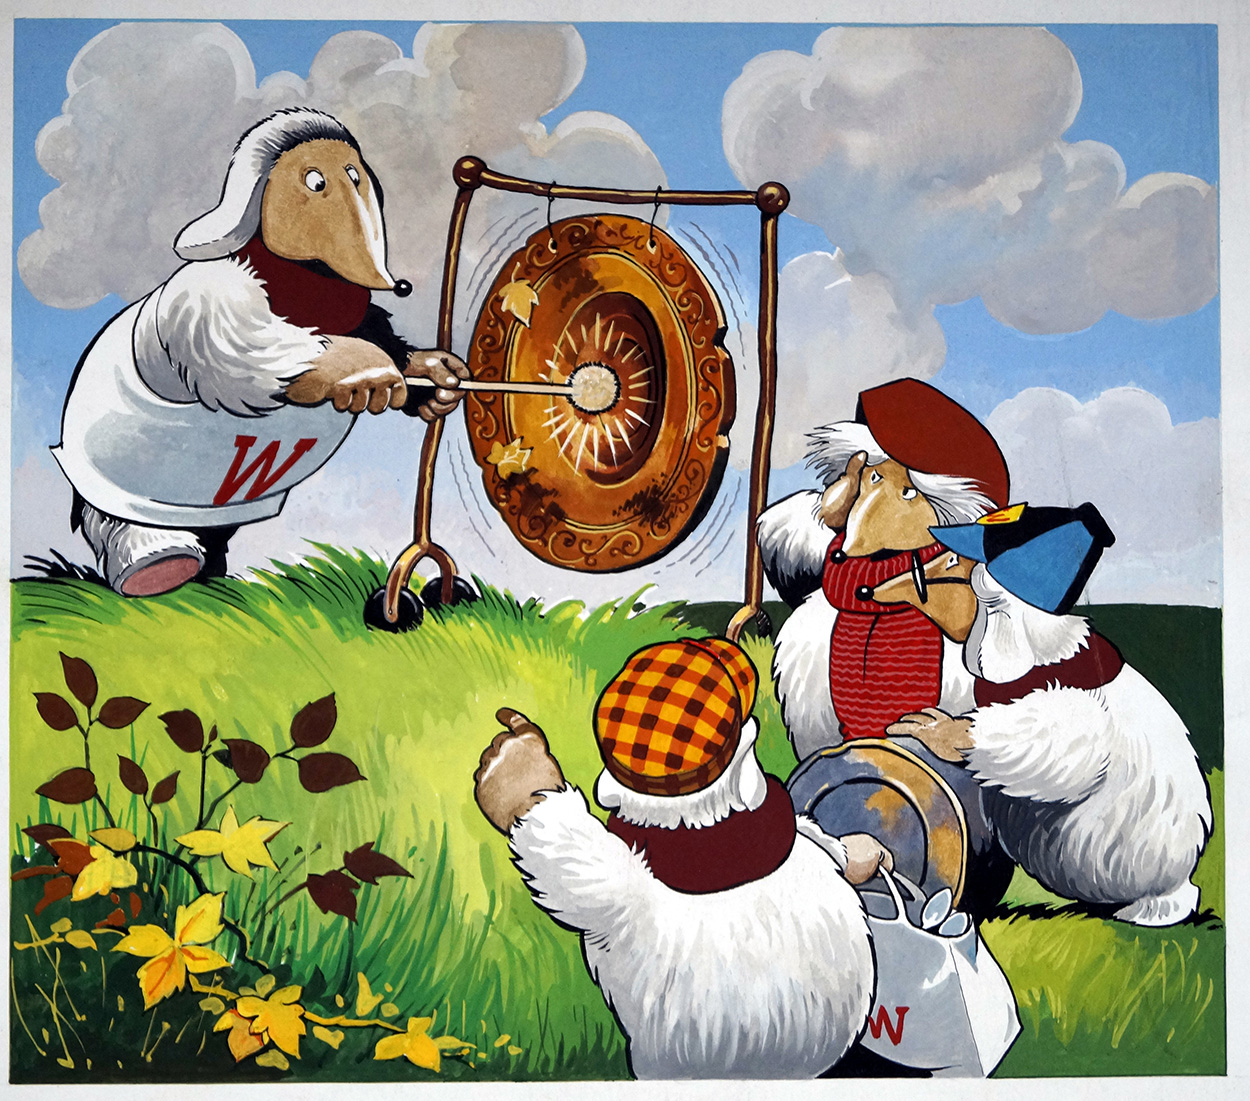 The Wombles: Gong Show (TWO pages) (Originals) art by The Wombles (Blasco) Art at The Illustration Art Gallery